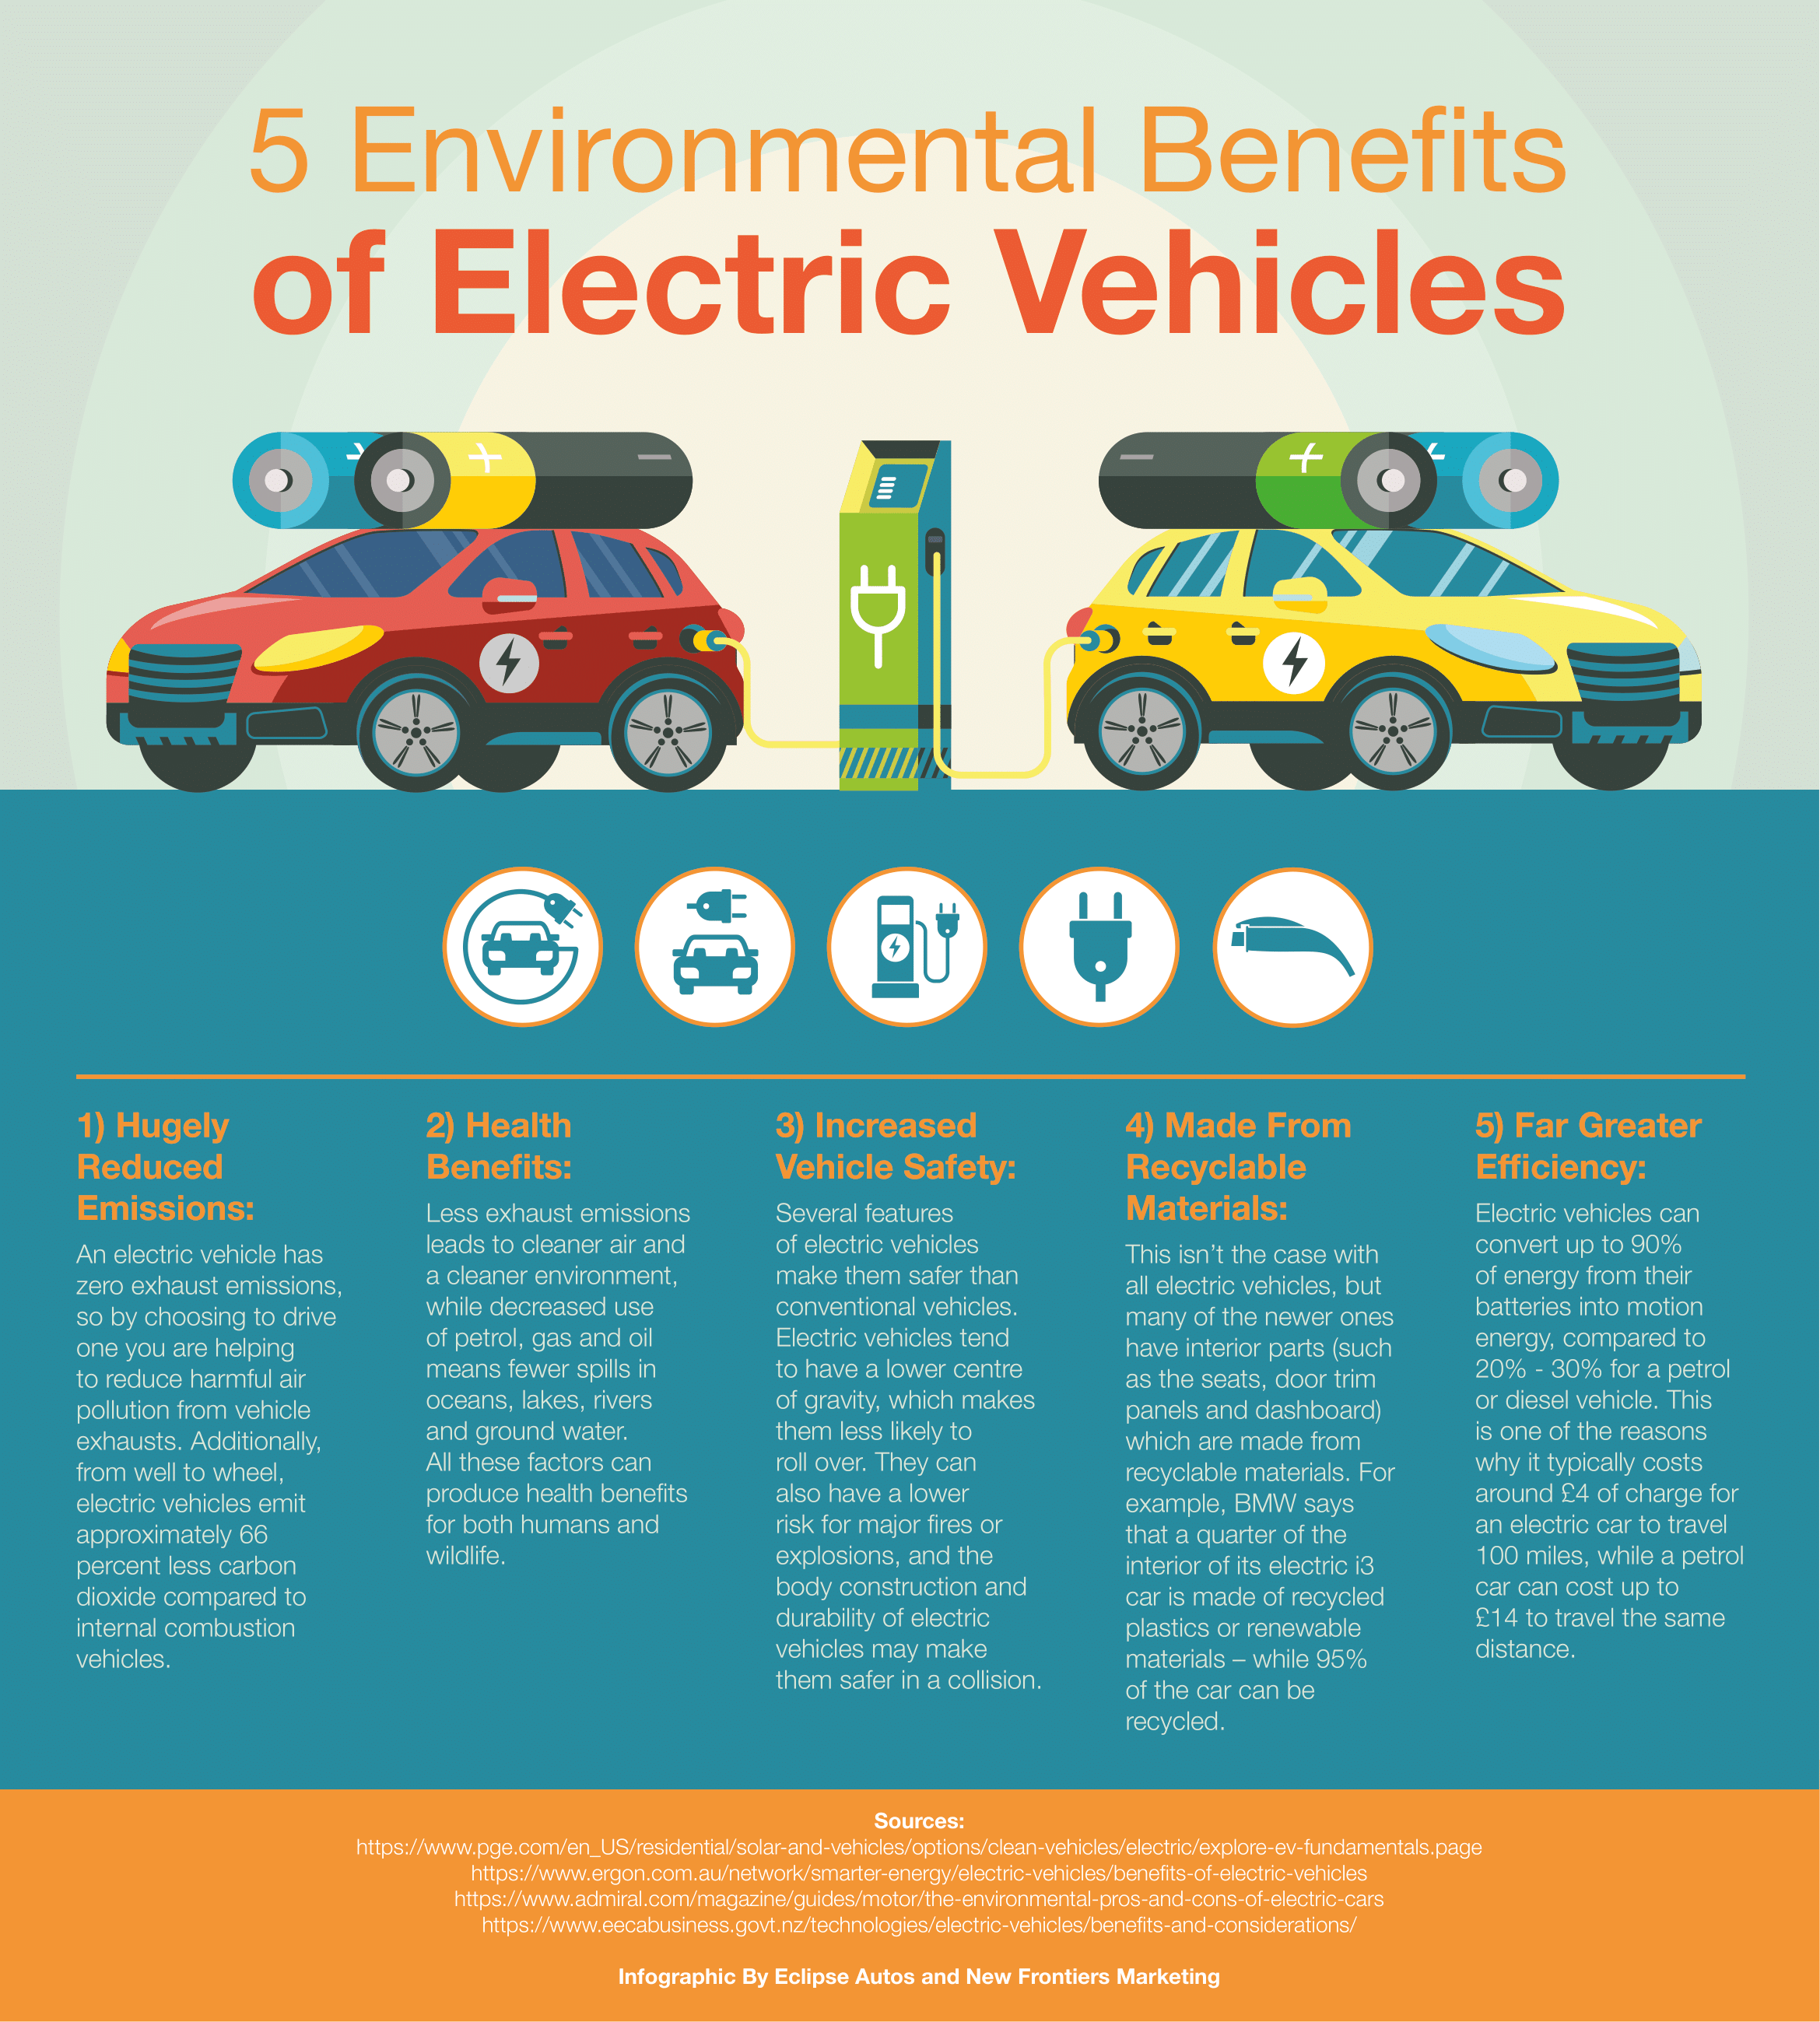 5 Environmental Benefits of Electric Vehicles